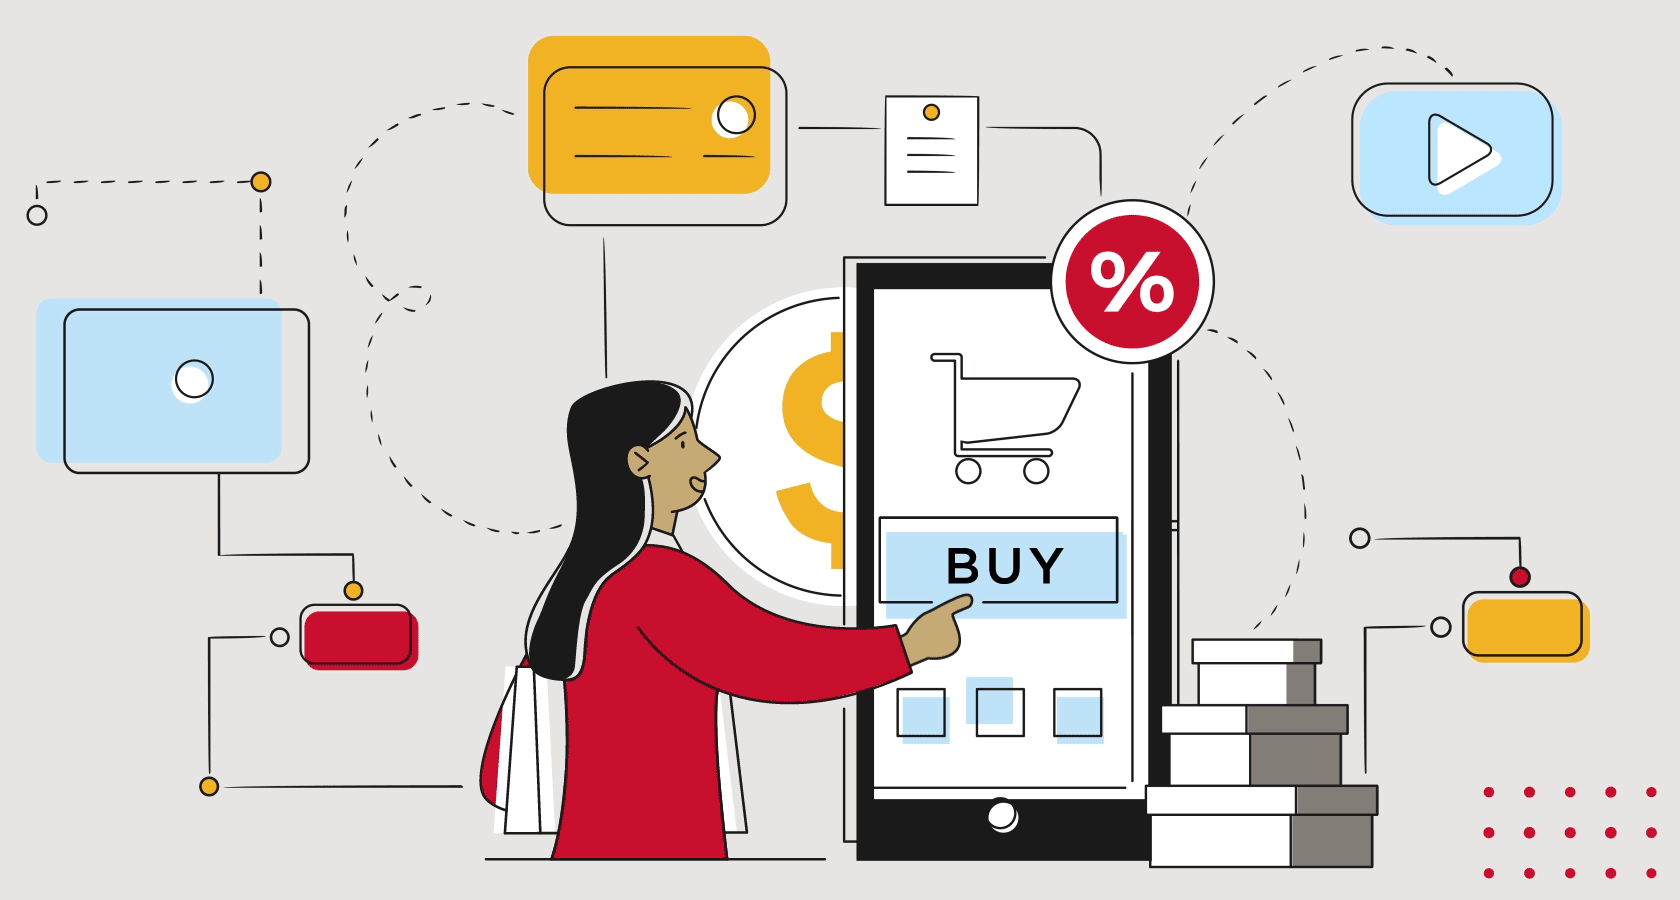 Bailey Brand Consulting B2B Digital Marketing - An illustration of a person tapping the "buy" button on a mobile device with lines connecting different graphics to the center mobile device drawing